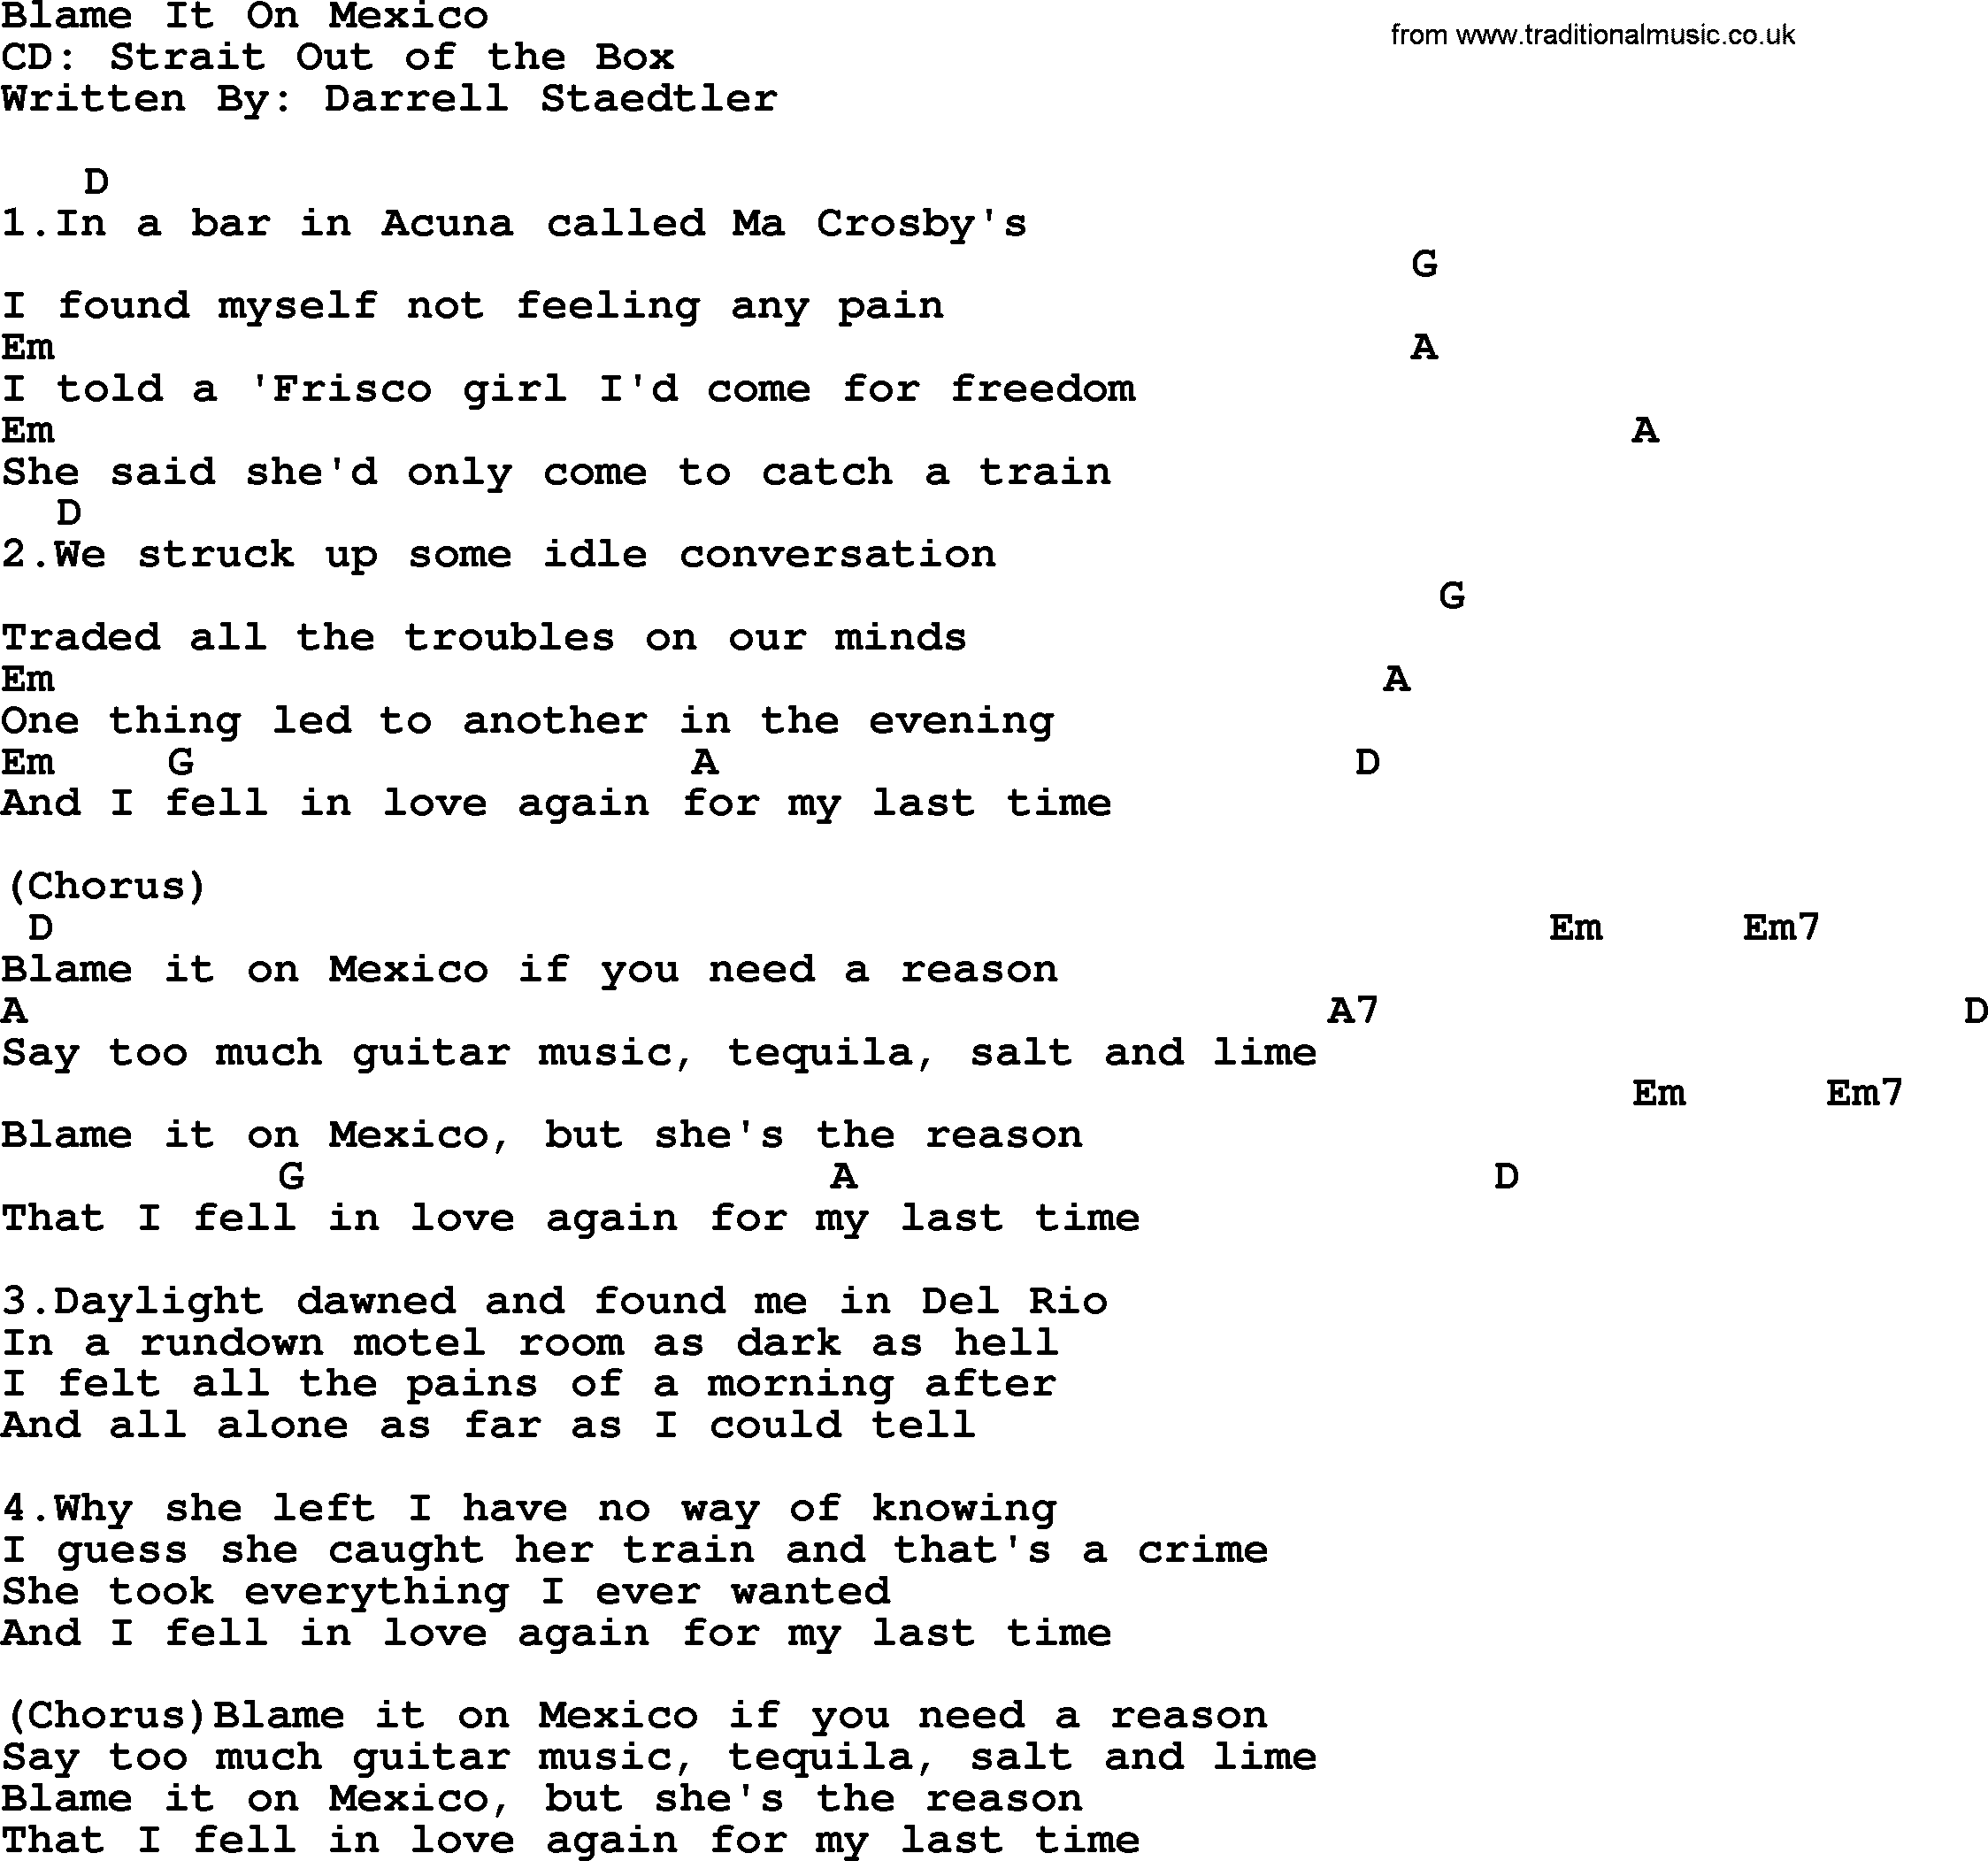 George Strait song: Blame It On Mexico, lyrics and chords